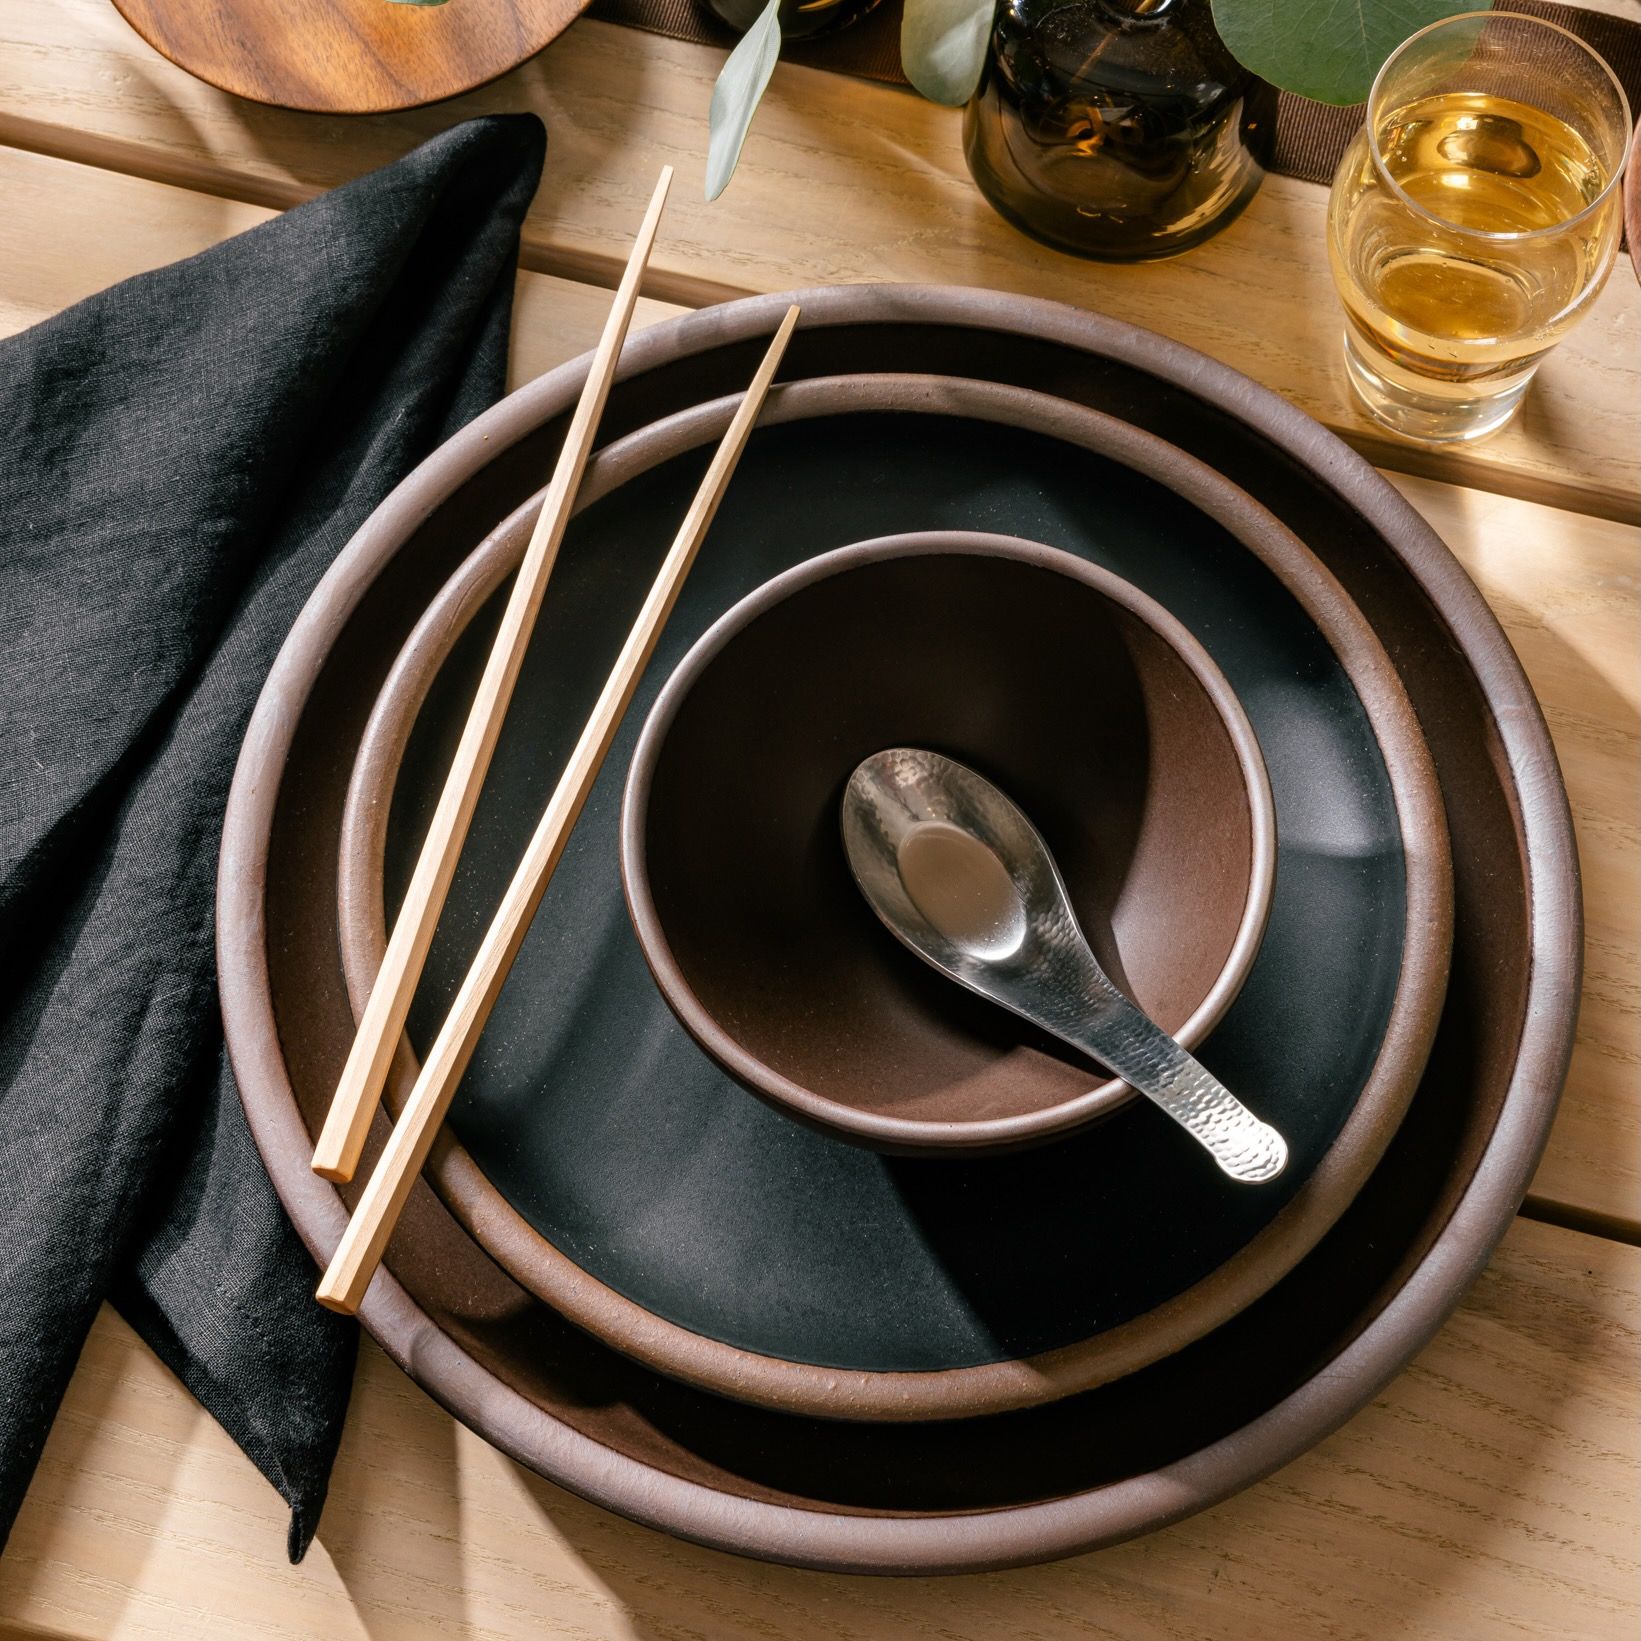 A table setting featuring a dark brown and dark teal large plate, side plate, and small shallow bowl. On top is a hammered steel soup spoon, and wooden chopsticks. Also pictured is a folded black napkin and a clear glass filled with a drink.